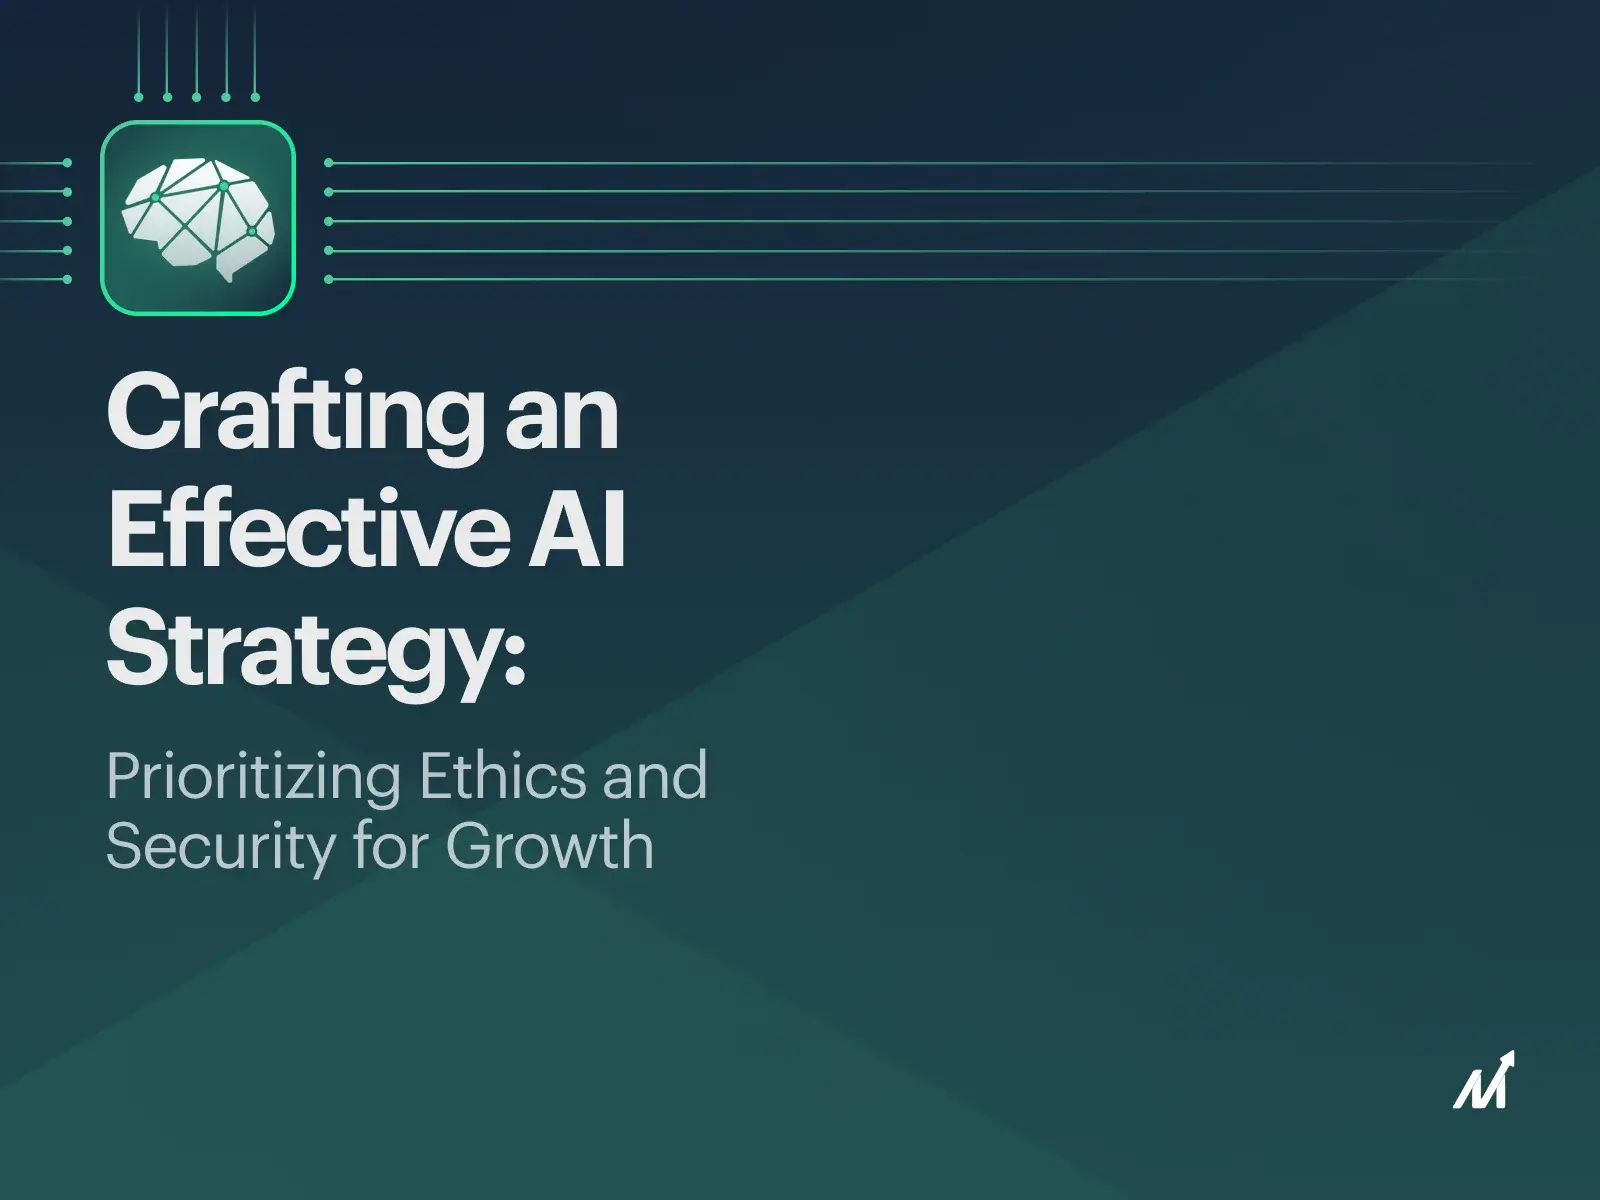 Crafting an Effective AI Strategy